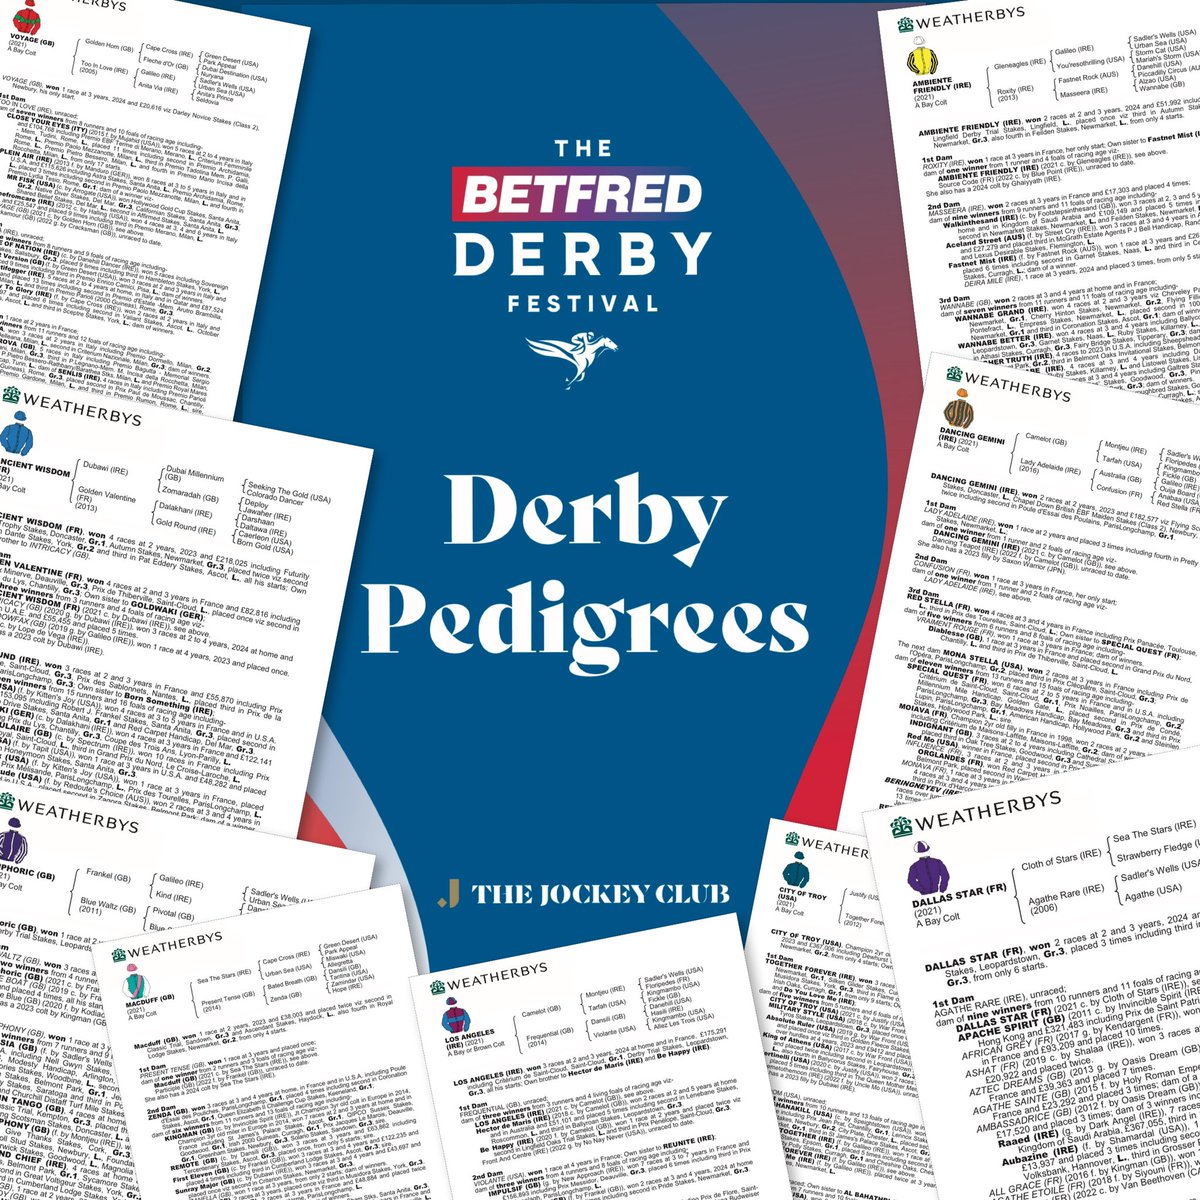 To add even more depth and detail to the @Betfred Derby picture the Weatherbys Bloodstock team have researched and edited the pedigrees of all 16 declared horses in the race. We have brought these together in a digital turn-page format which we hope you’ll enjoy 👉🏻